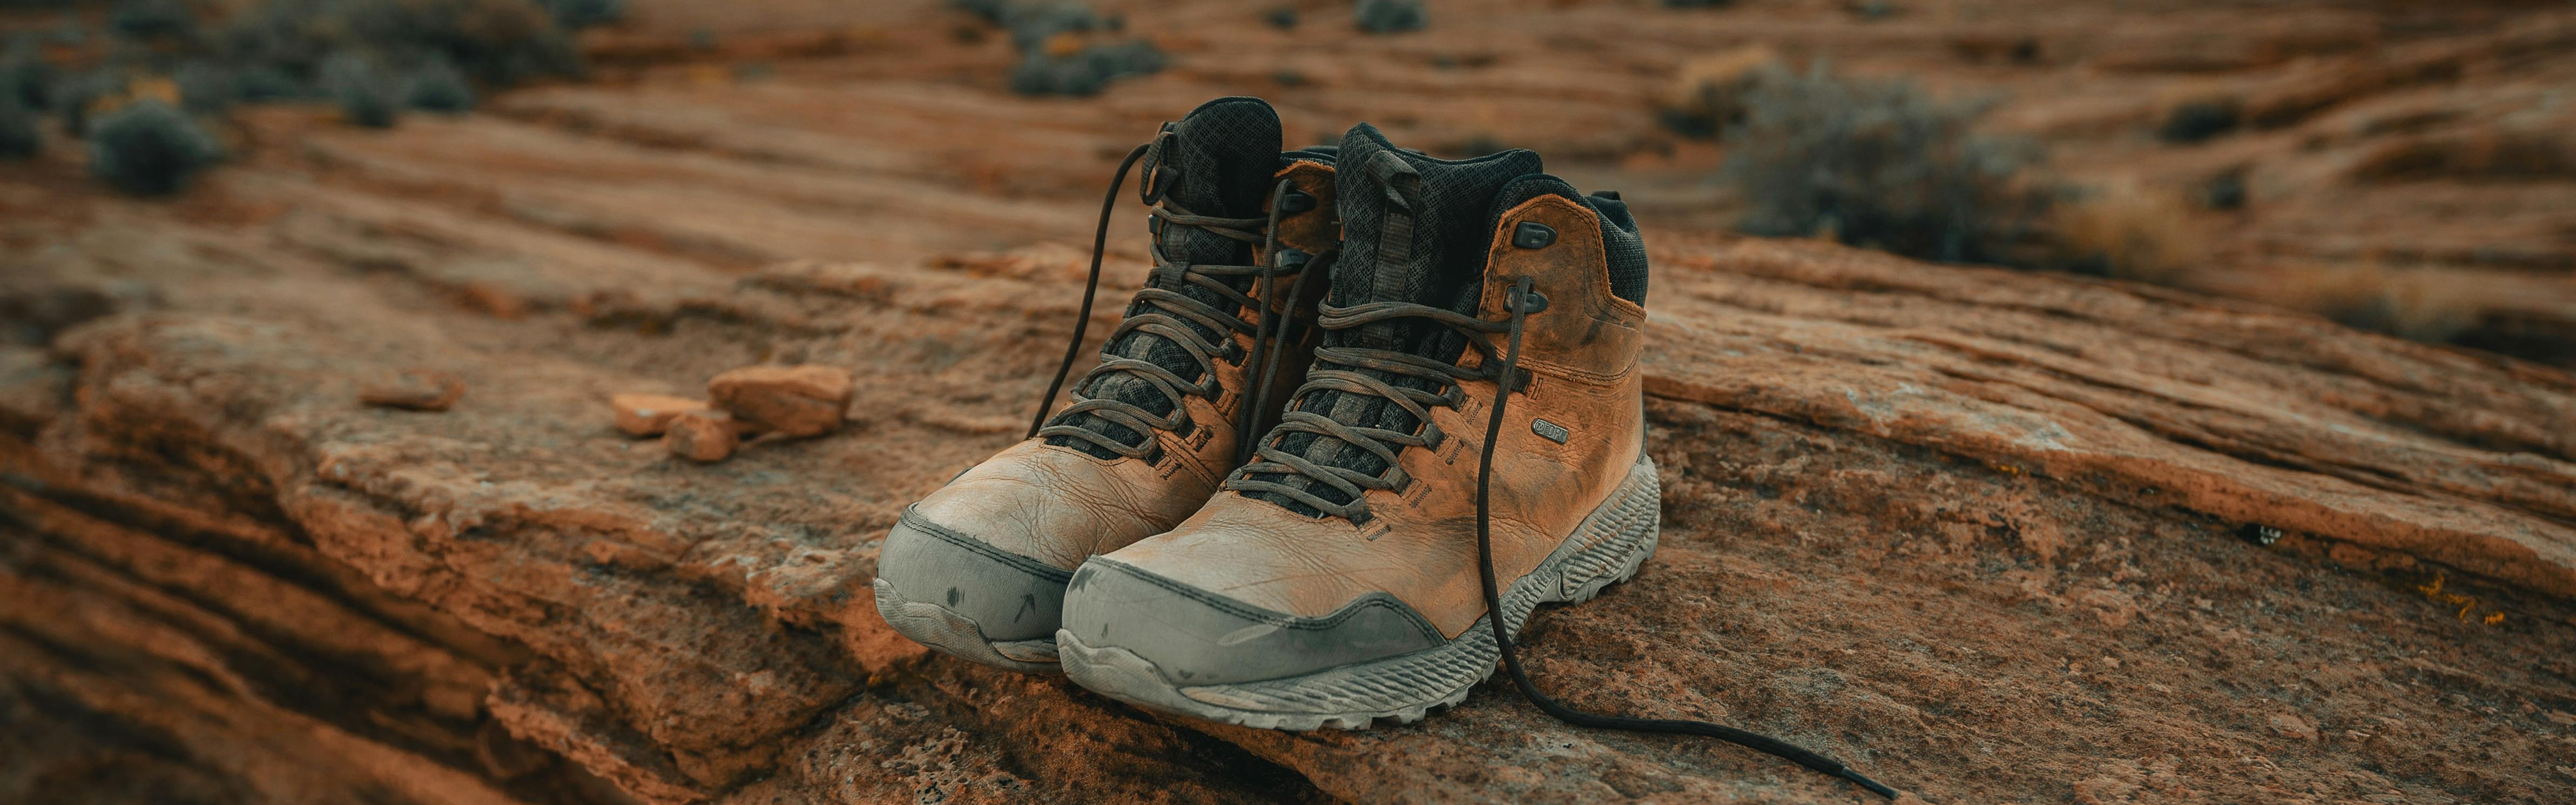 10 of the Trendiest Hiking Boots 